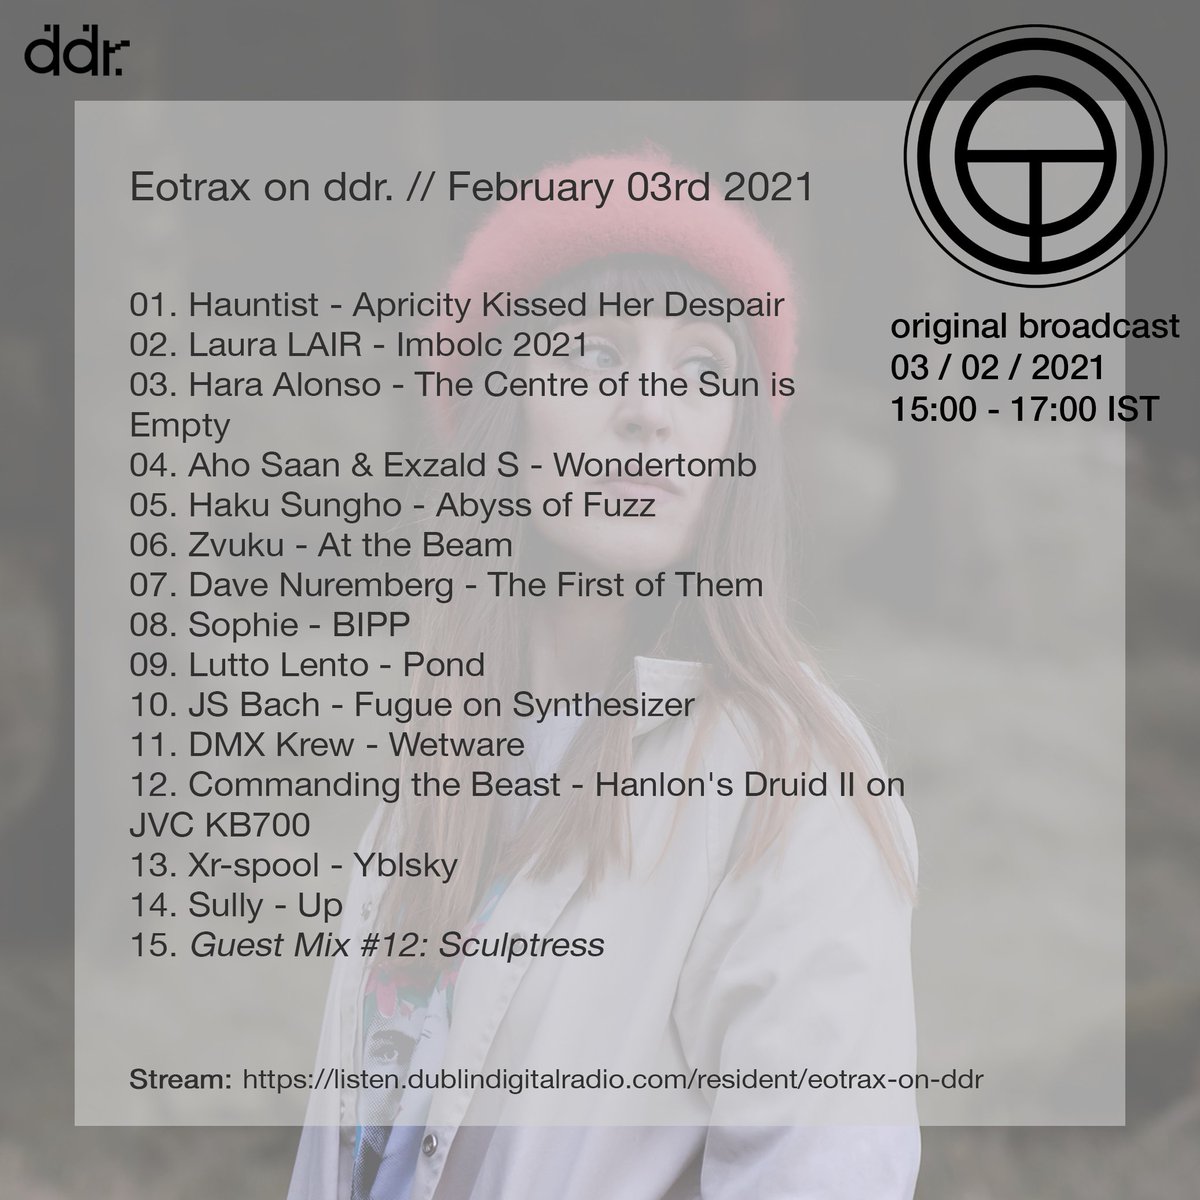 Most recent show for @DublinDigiRadio ft. @sinead_meaney (Sculptress) is now archived and streaming >>> listen.dublindigitalradio.com/resident/eotra…